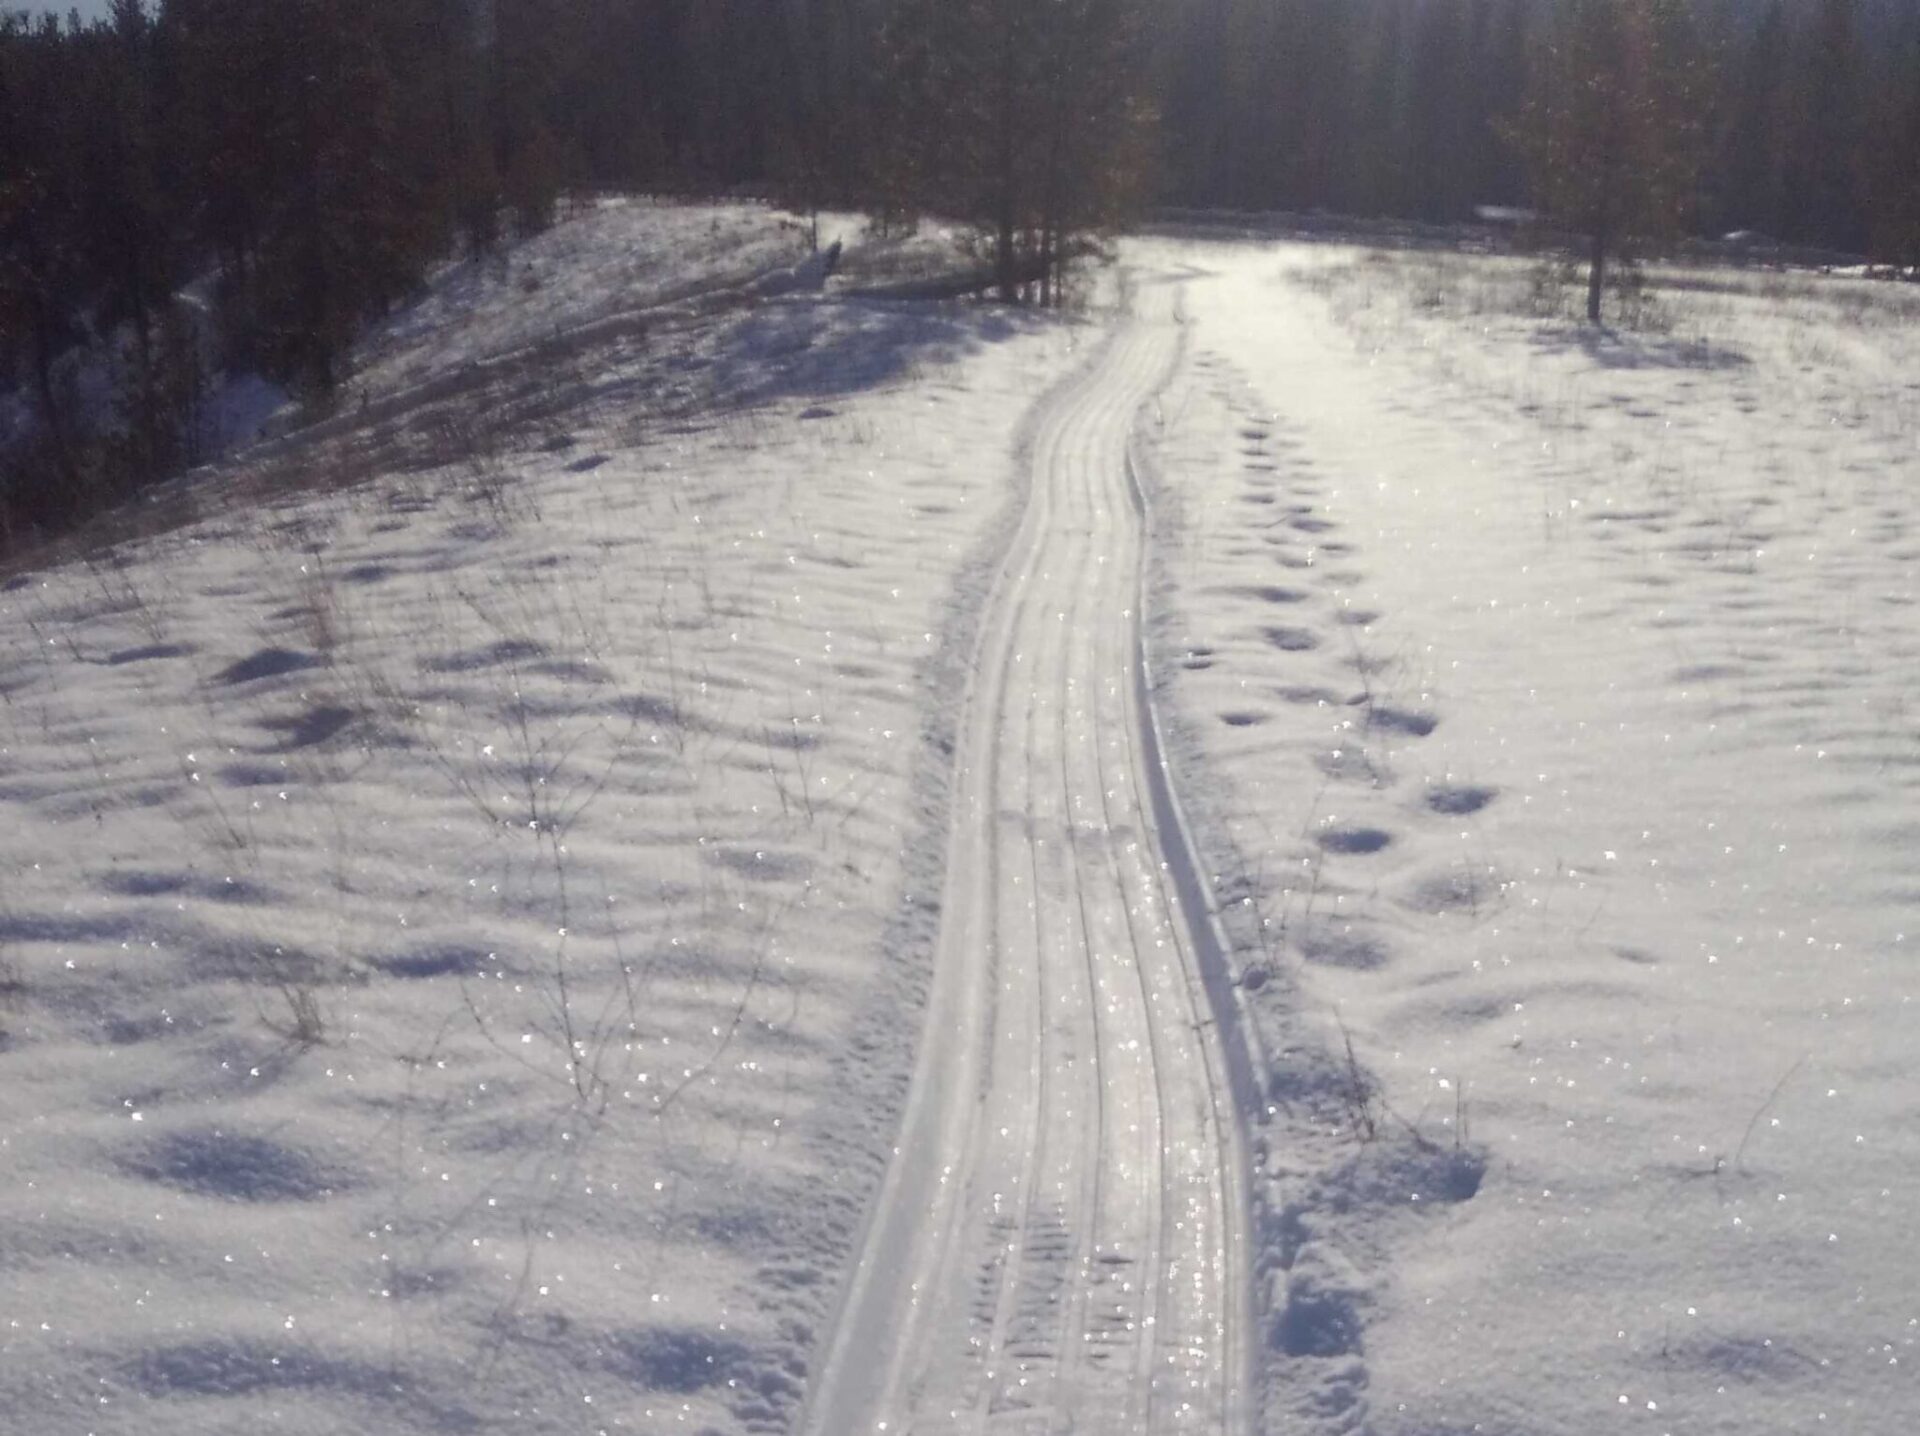 Groomed trail for fat bike riders.